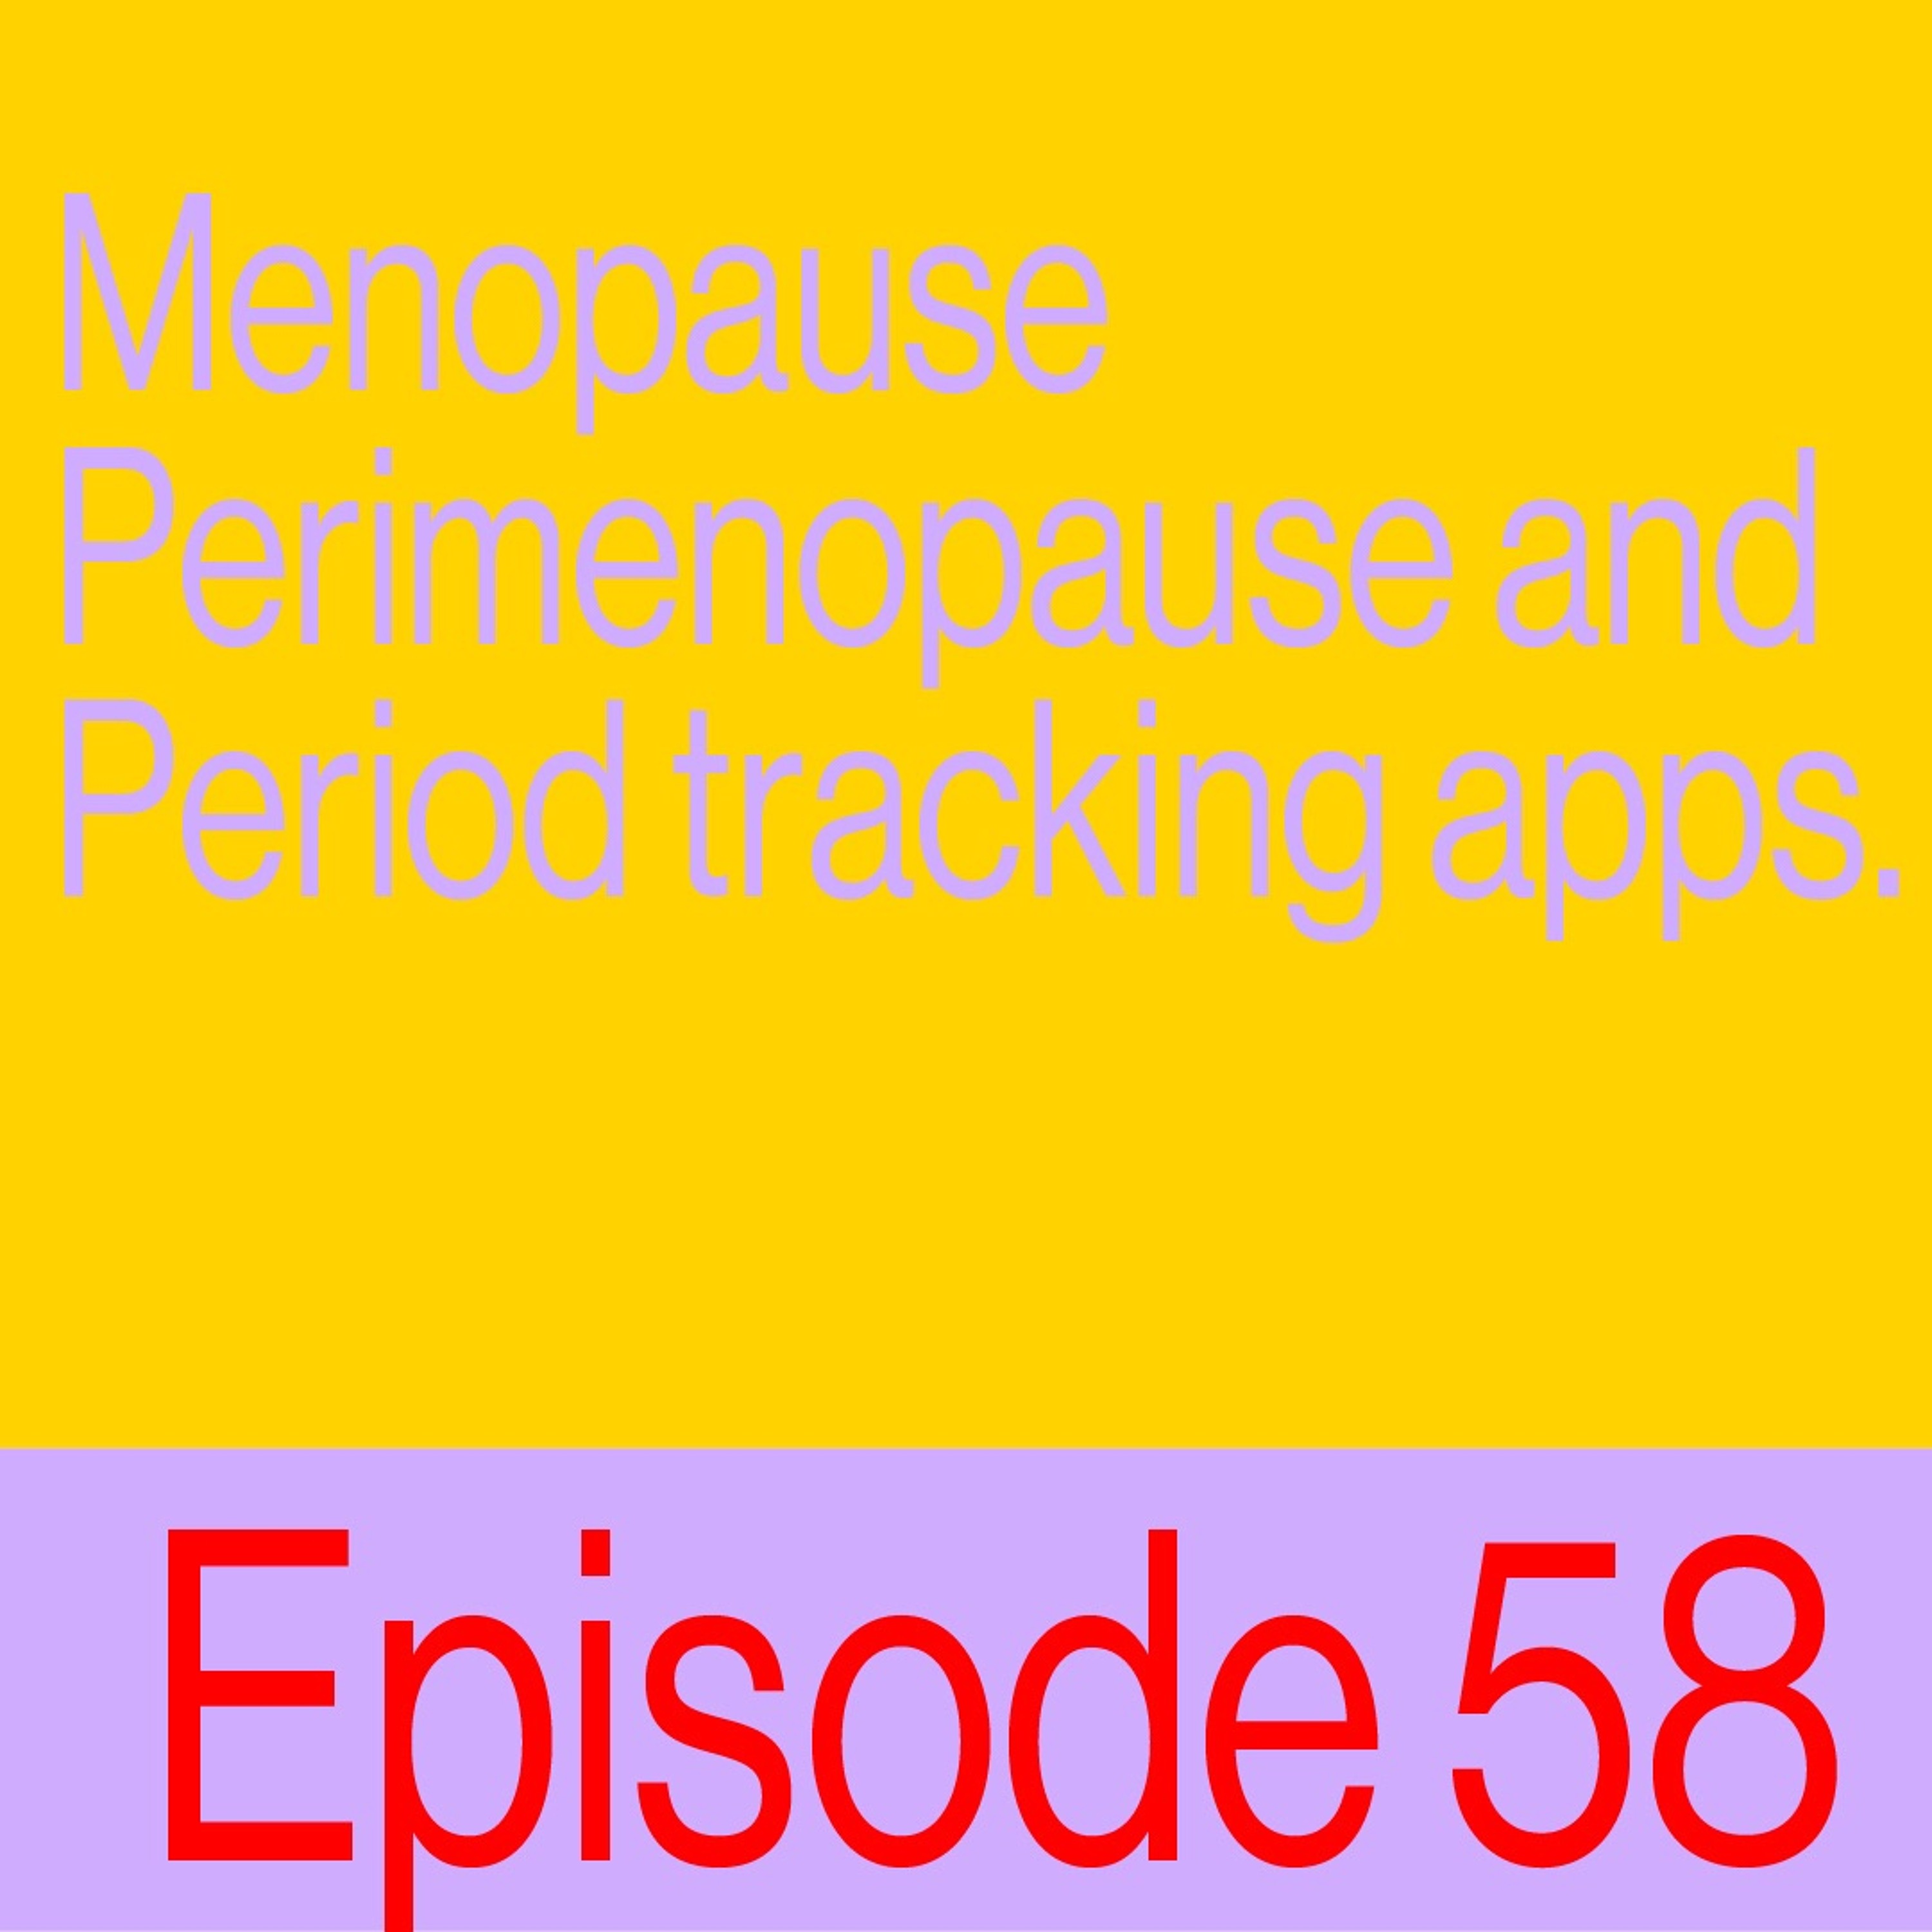 Episode 58: Menopause, Perimenopause And Period Tracking Apps